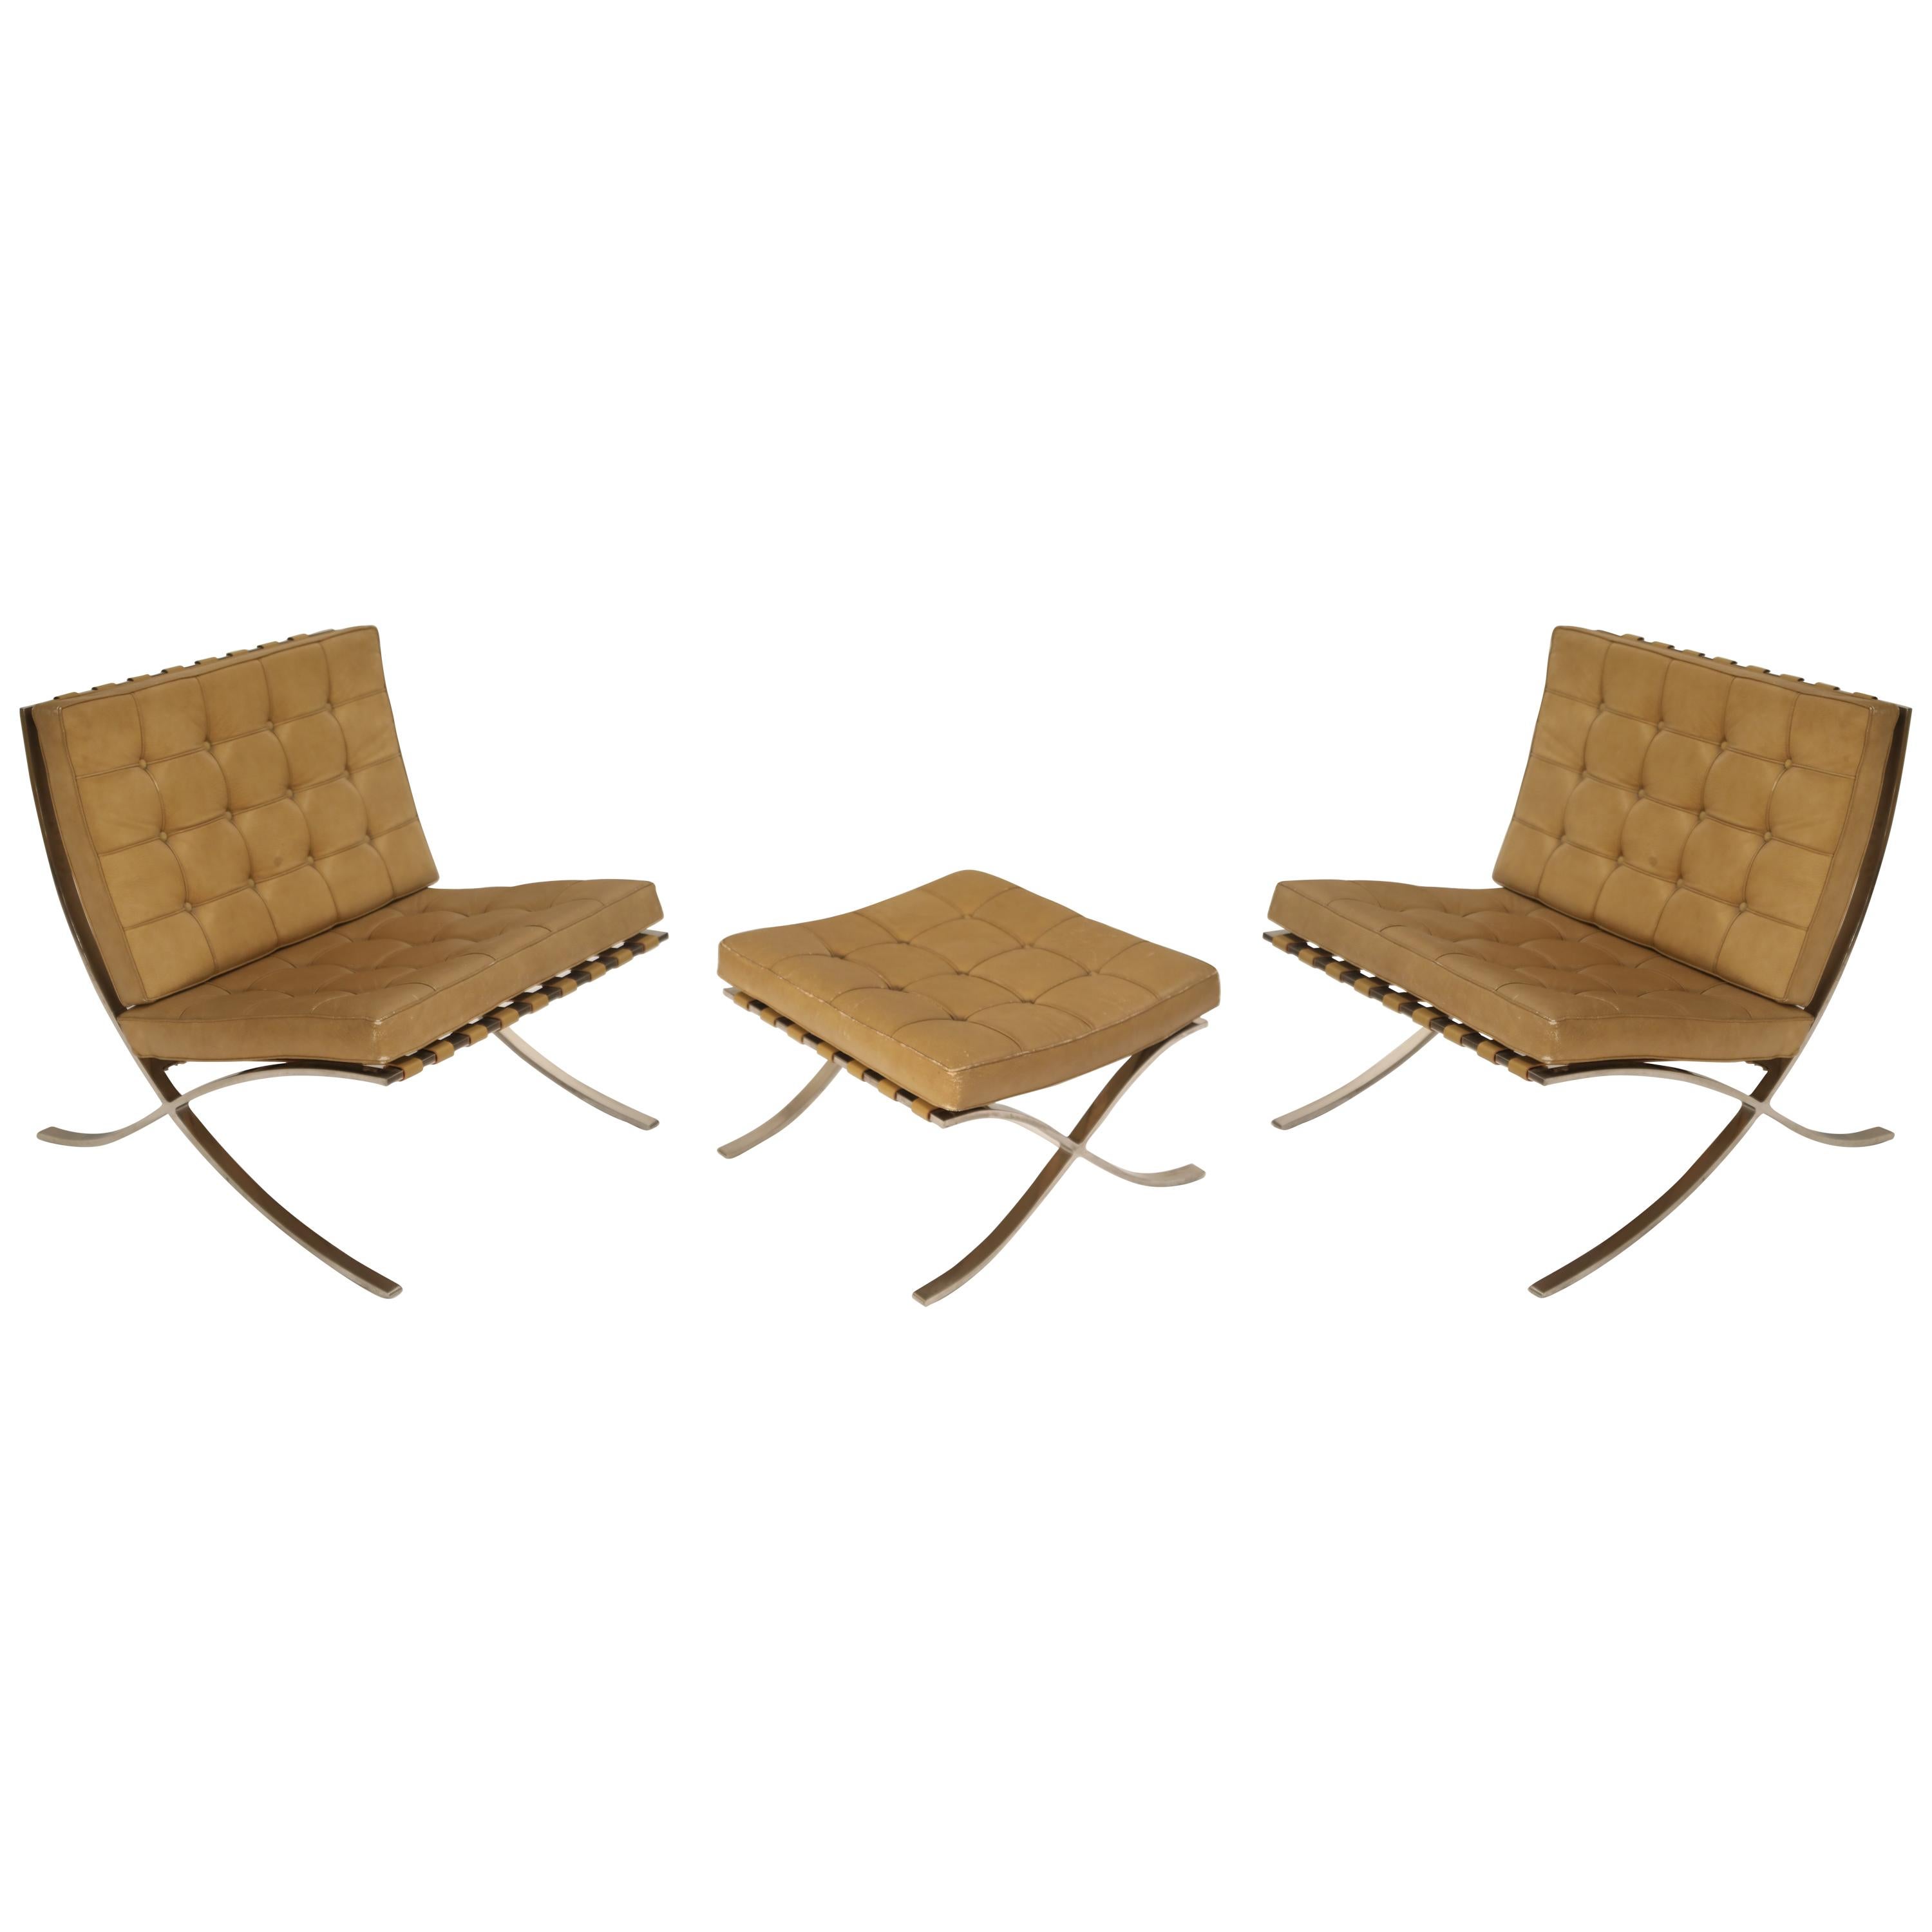 Barcelona Chairs & Ottoman by Mies van der Rohe for Knoll International, 1960s